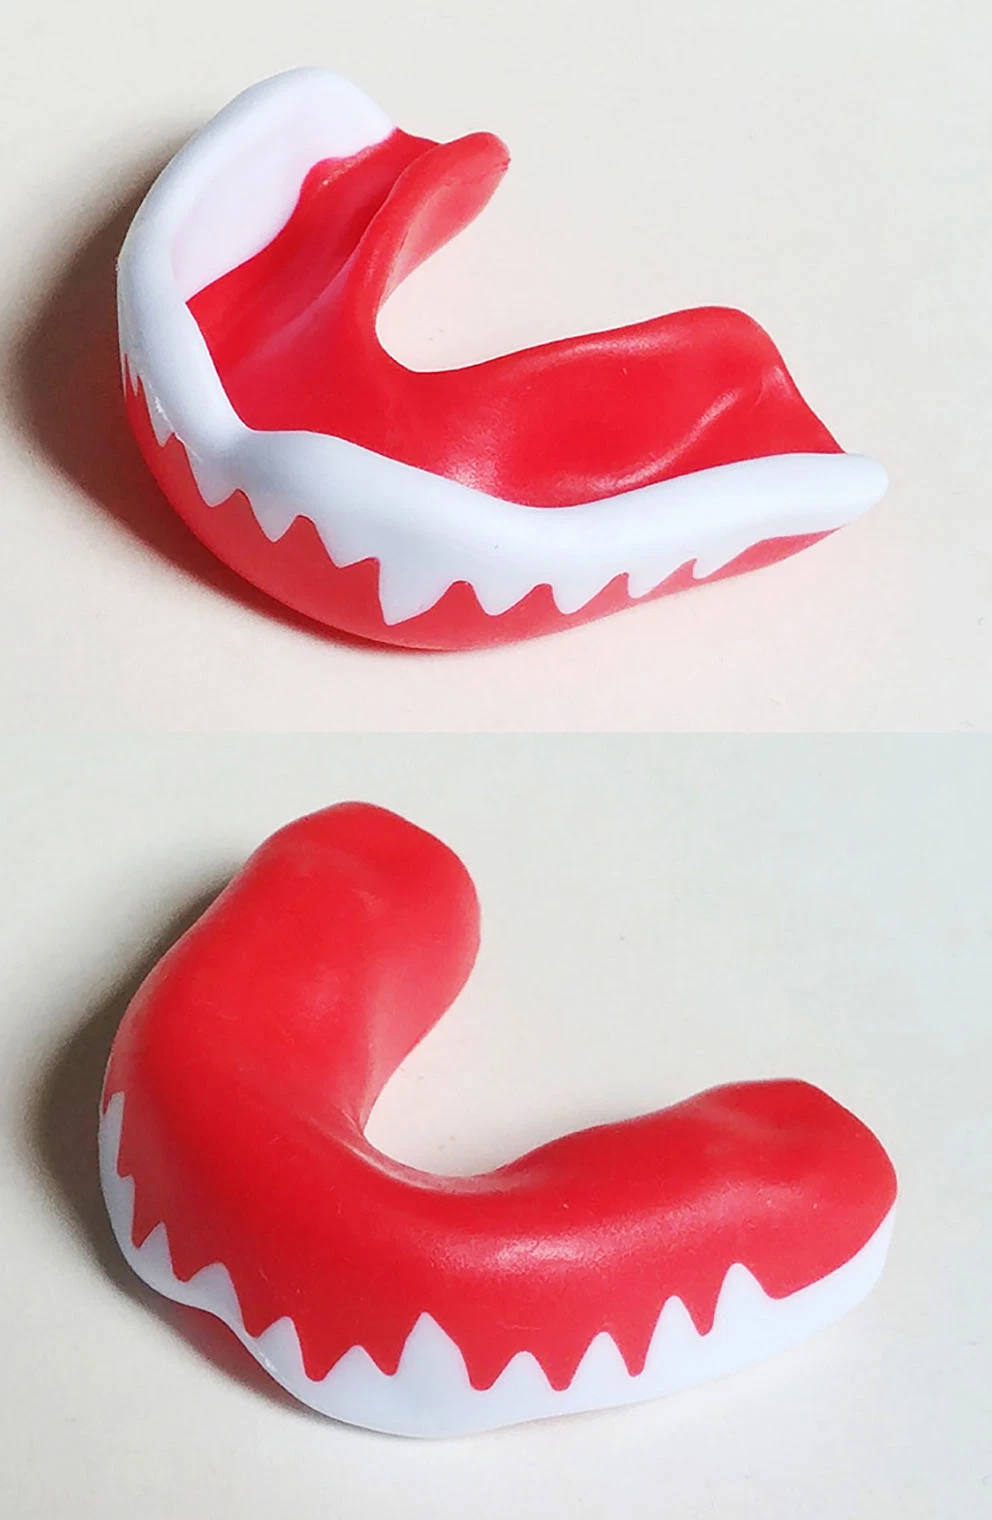 Sports Mouth Guard for Football, Basketball, Boxing